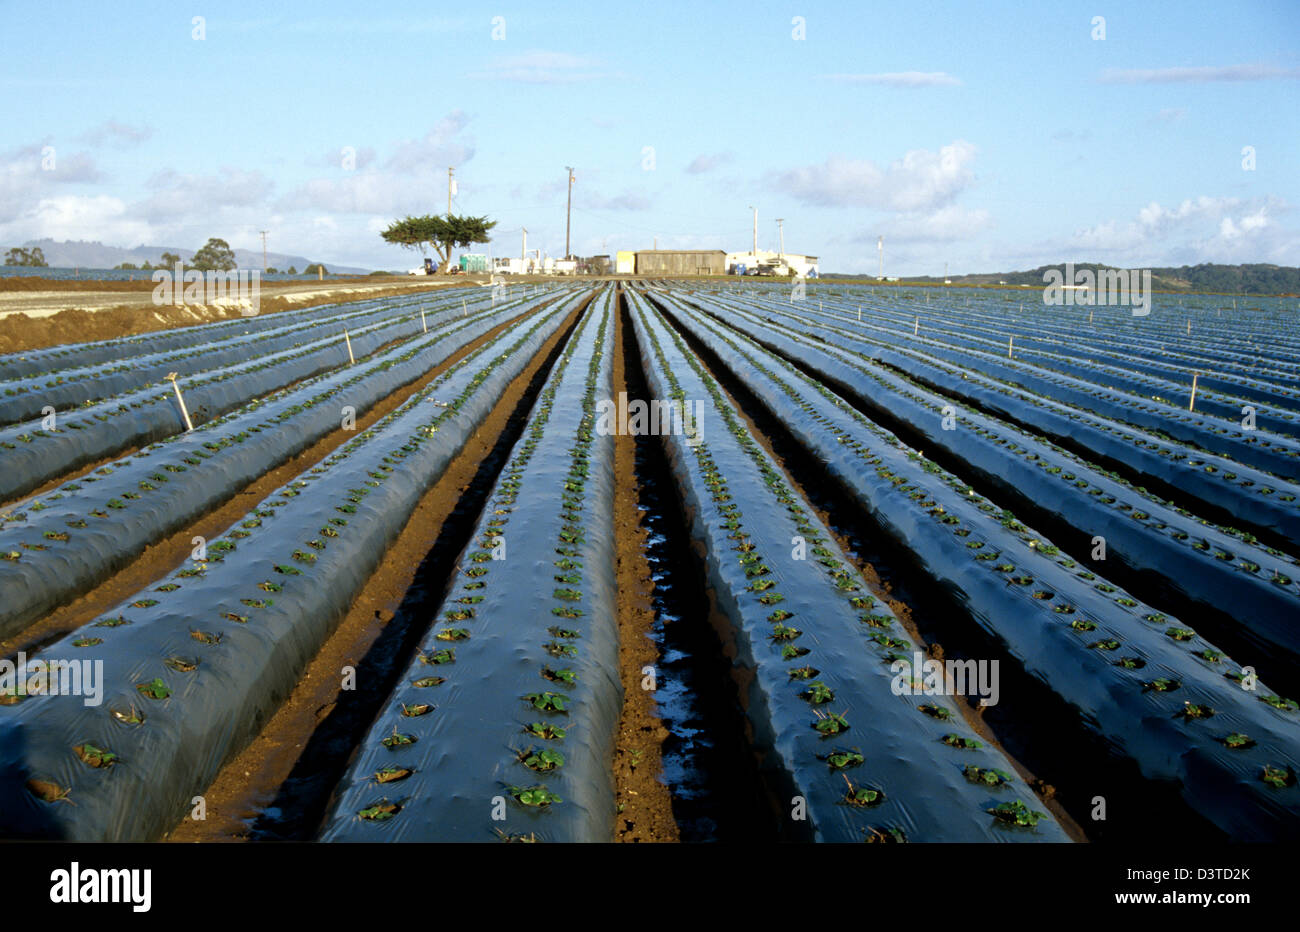 rows of vegetables are protected with cloche plastic sheeting Stock Photo